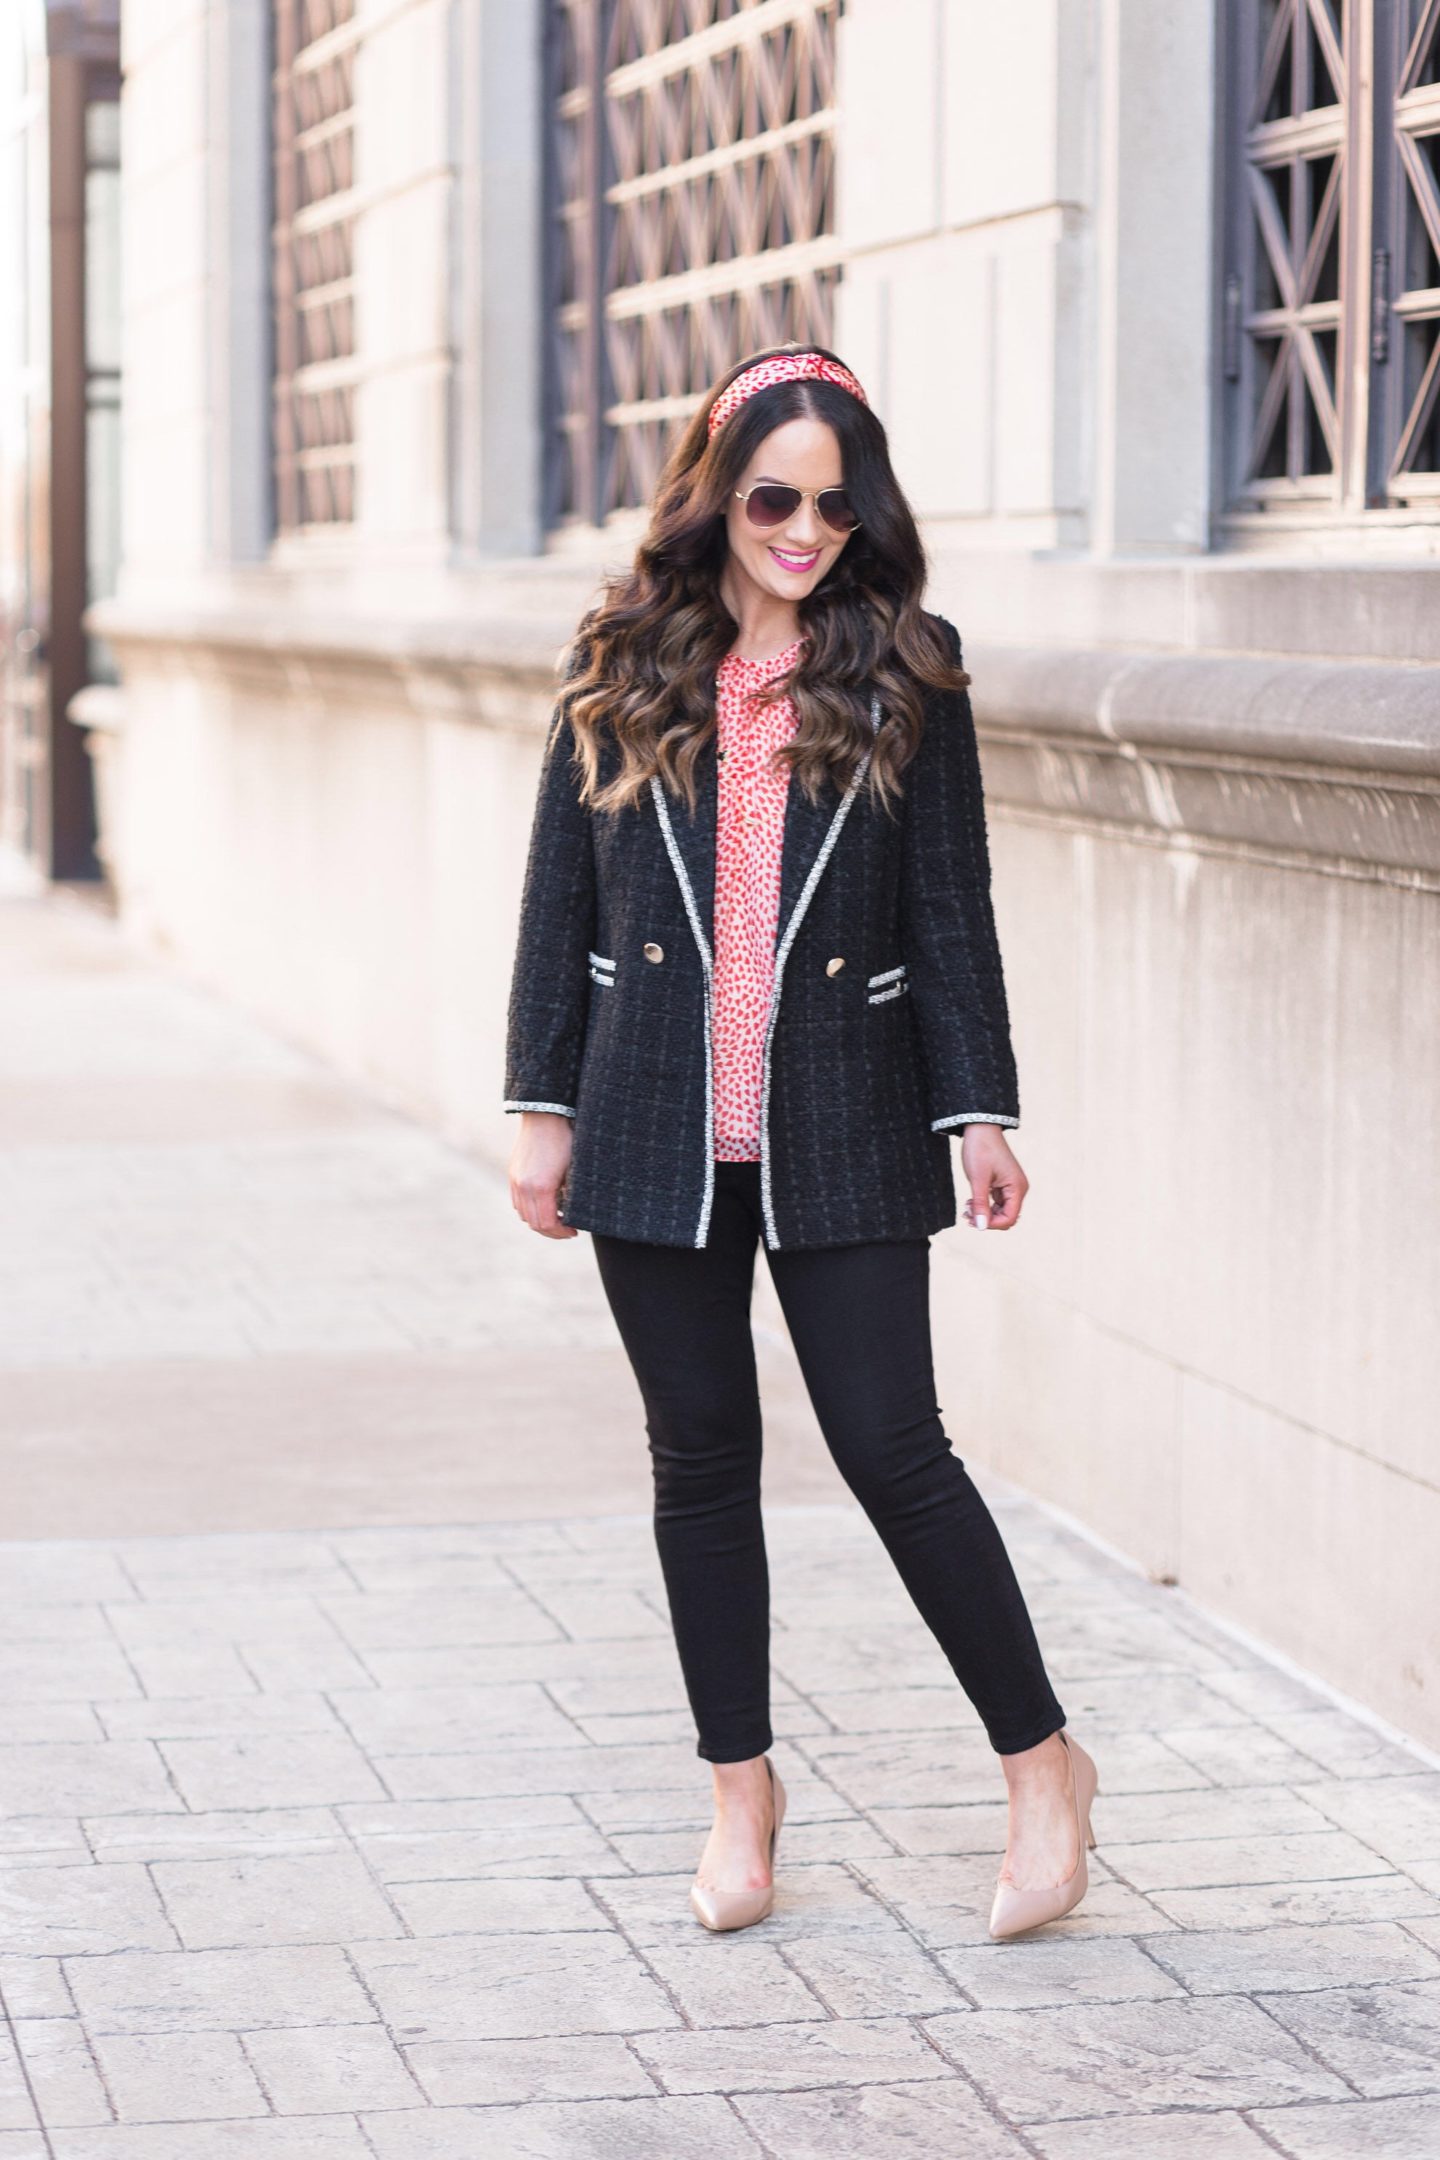 Chic Valentine's Outfits + New Arrivals & Promo! - The Double Take Girls